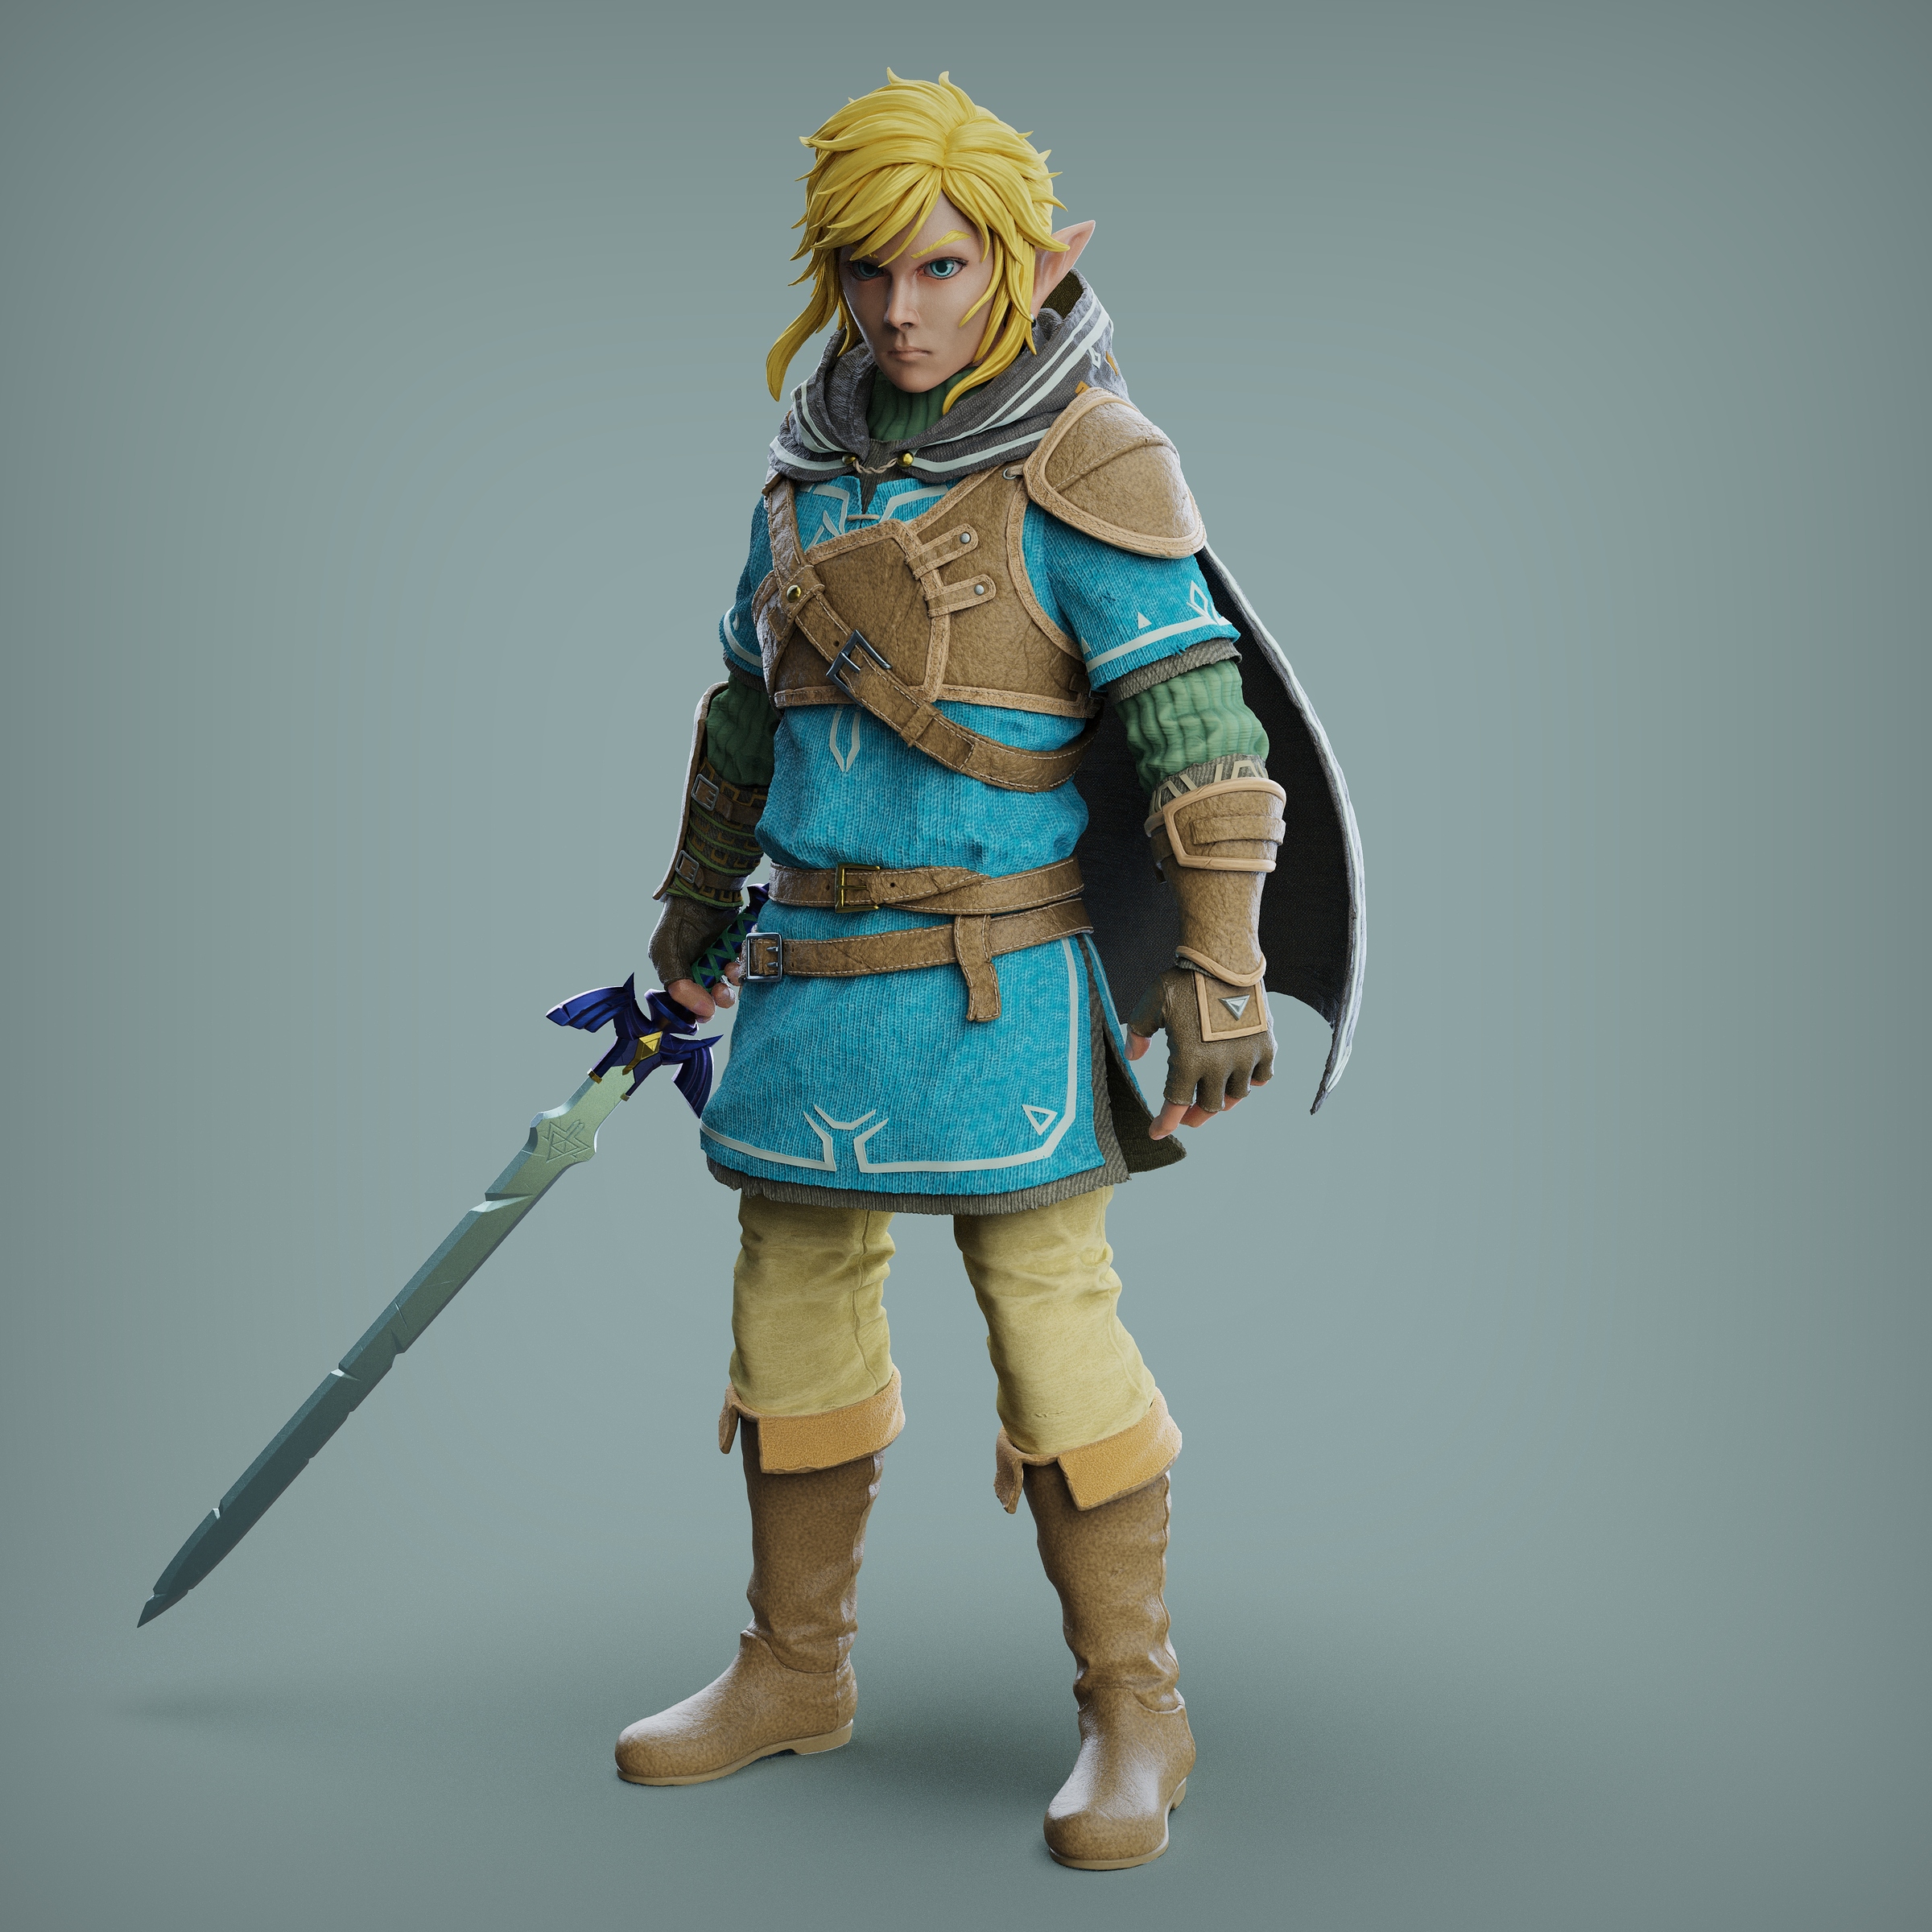 Breath of the wild zbrush download free winzip 18